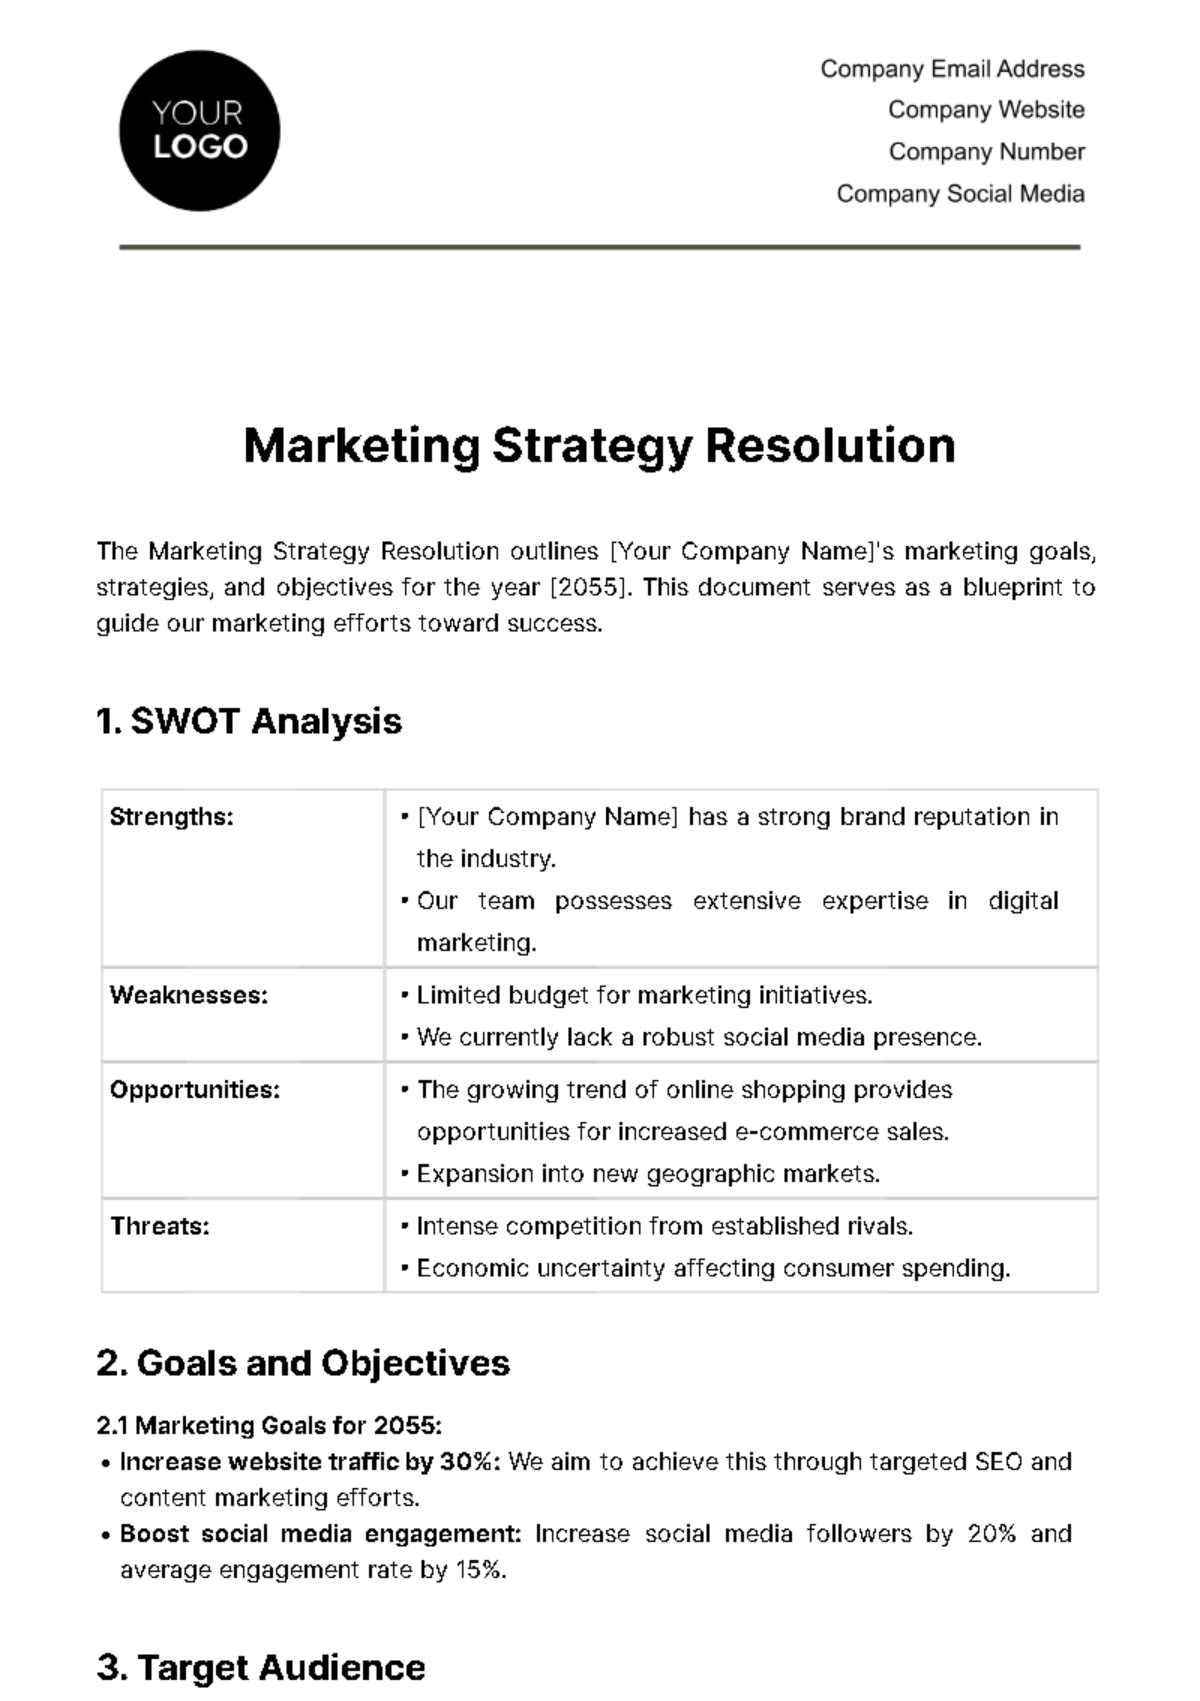 Marketing Strategy Resolution Template